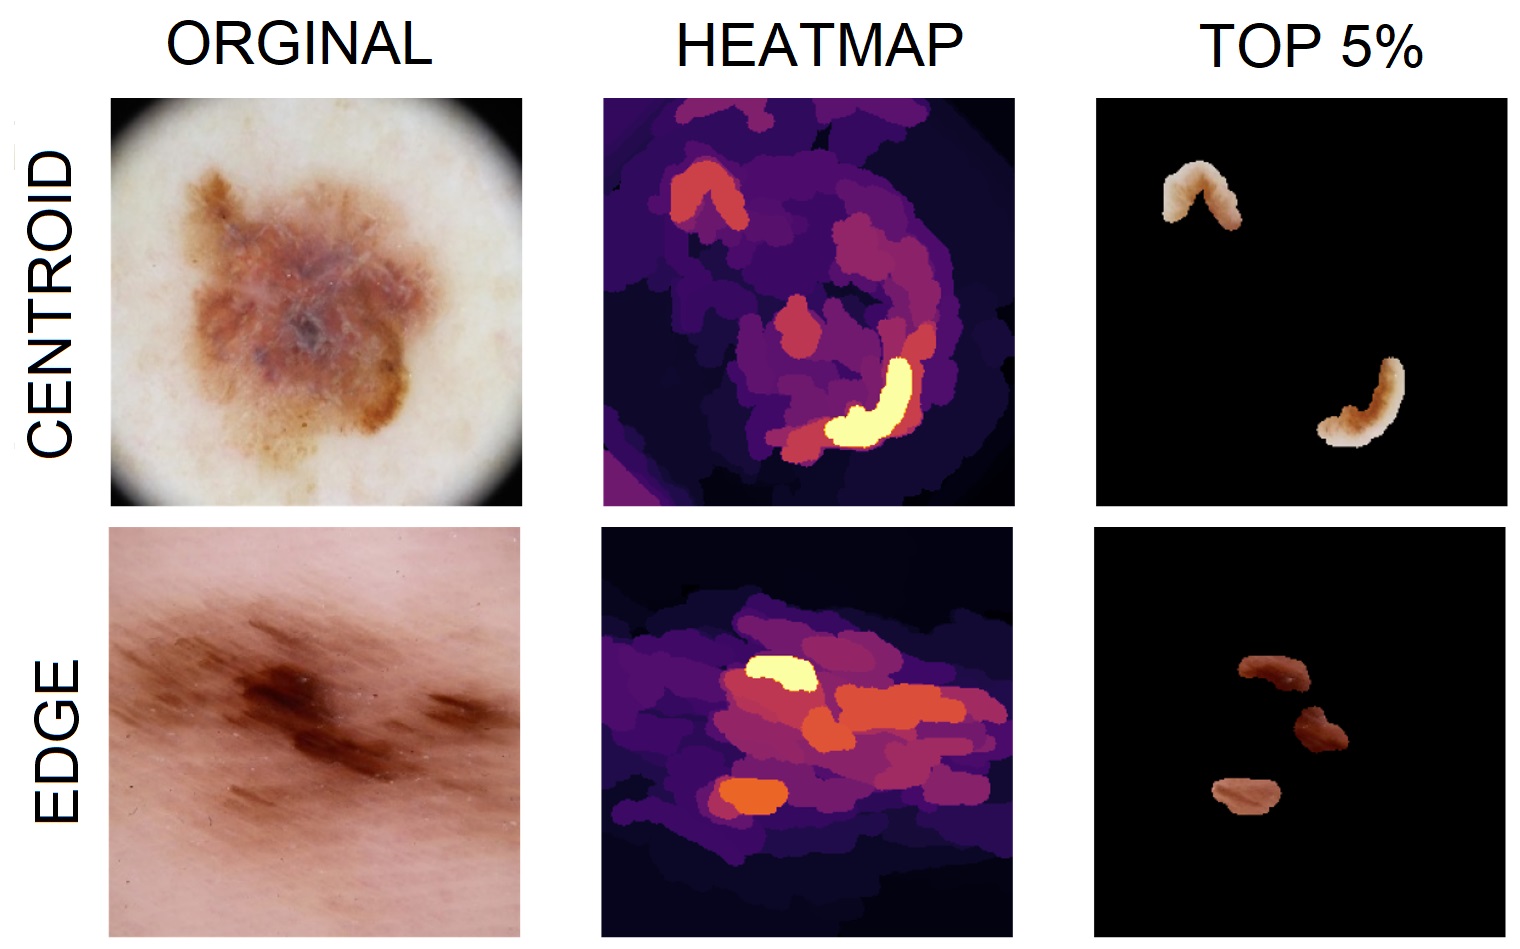 Two examples from the malignant class, which were found in the center, and in the boundary between two clusters respectively, examined using XRAI heatmaps.